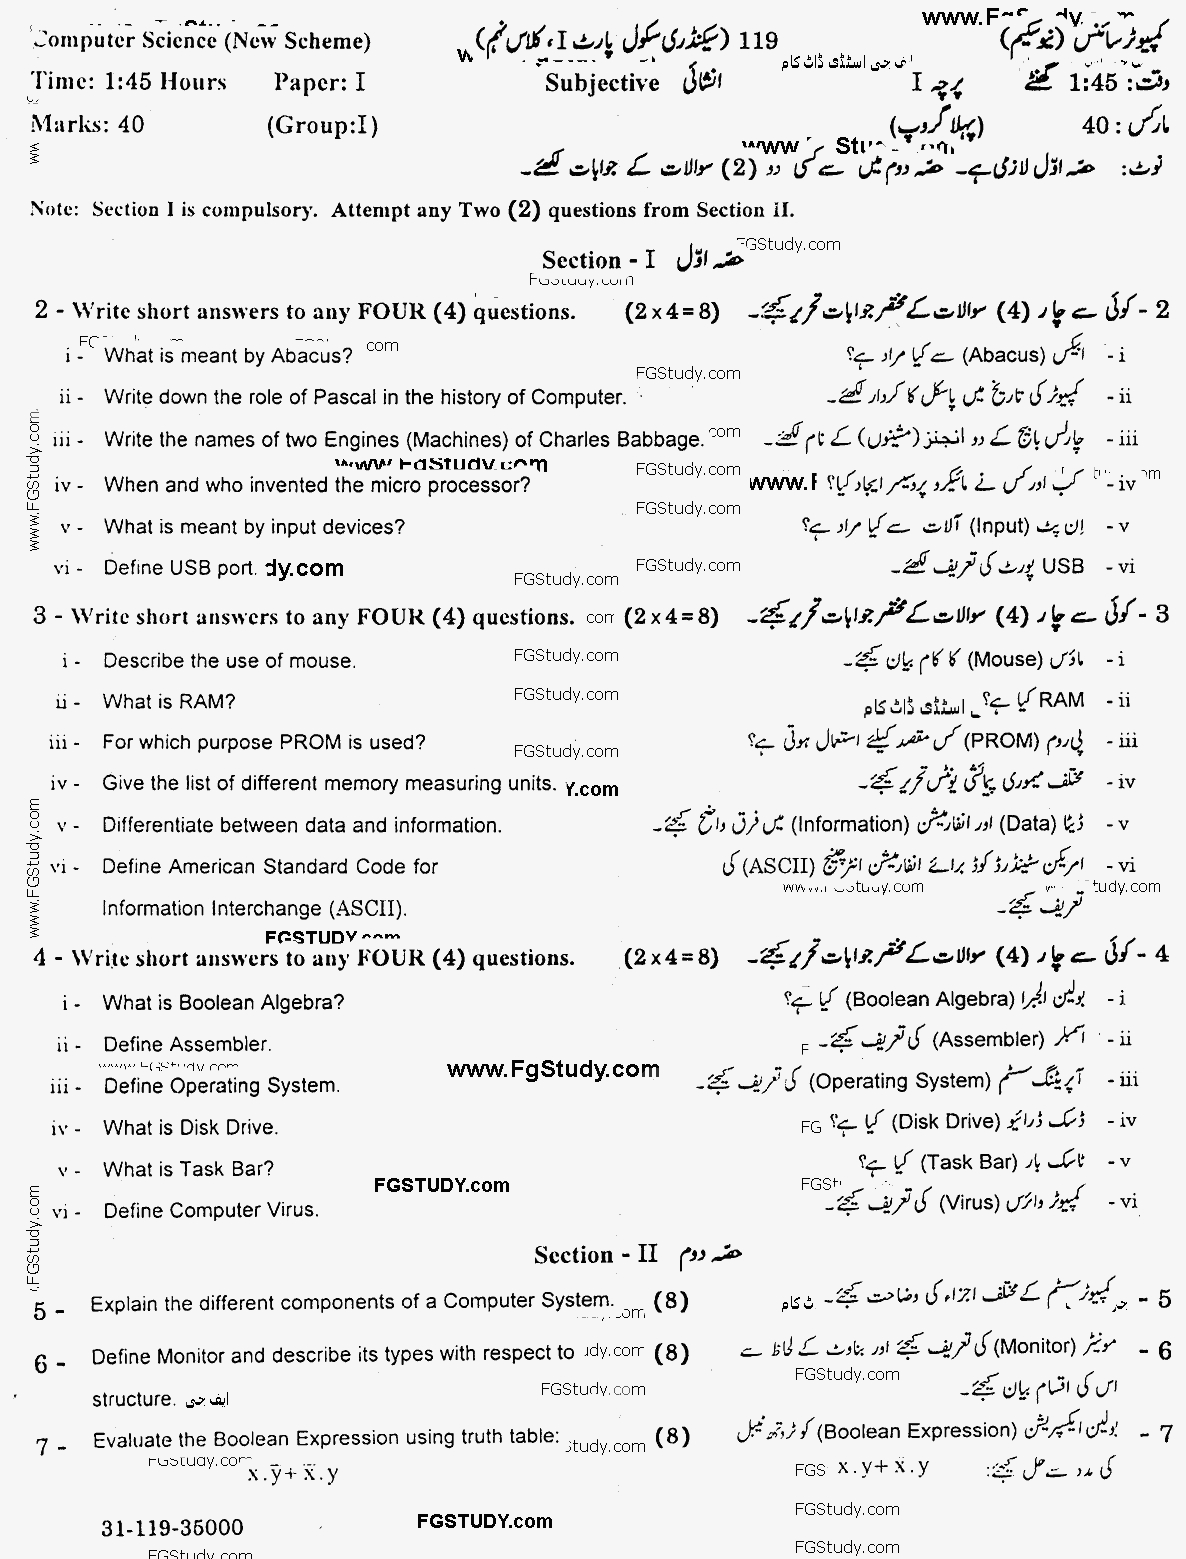 Gujranwala Board Computer Science Subjective Group 1 9th Class Past Papers 2019